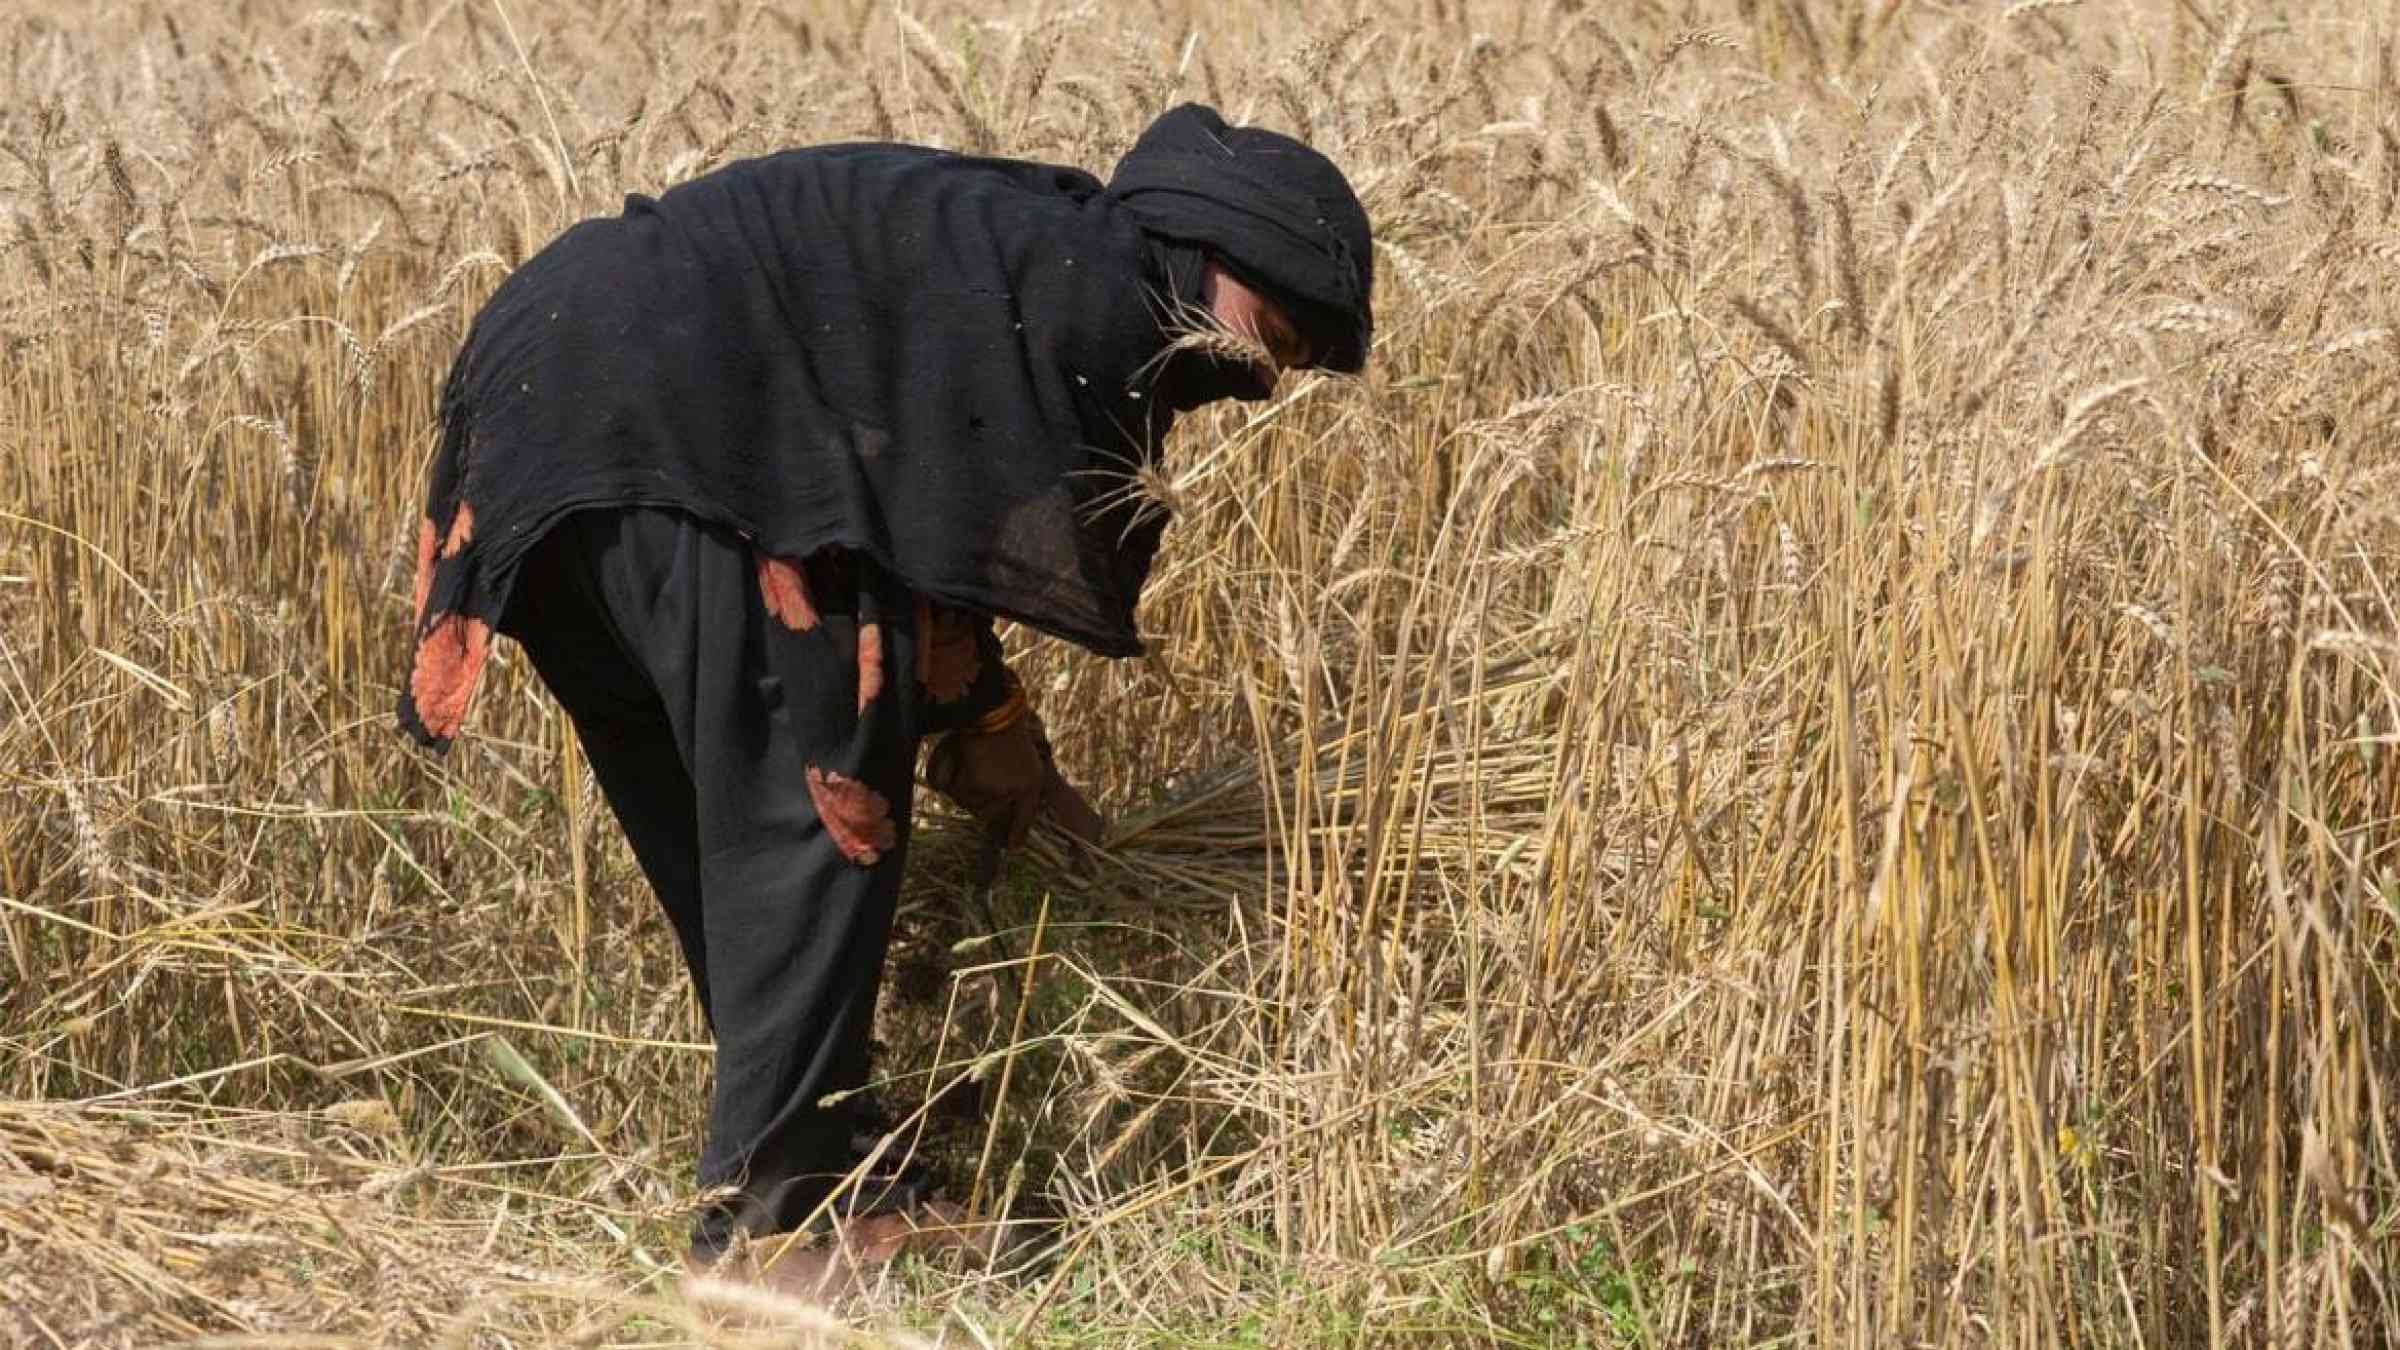 A woman farmer harvests wheat in Lahore, Pakistan